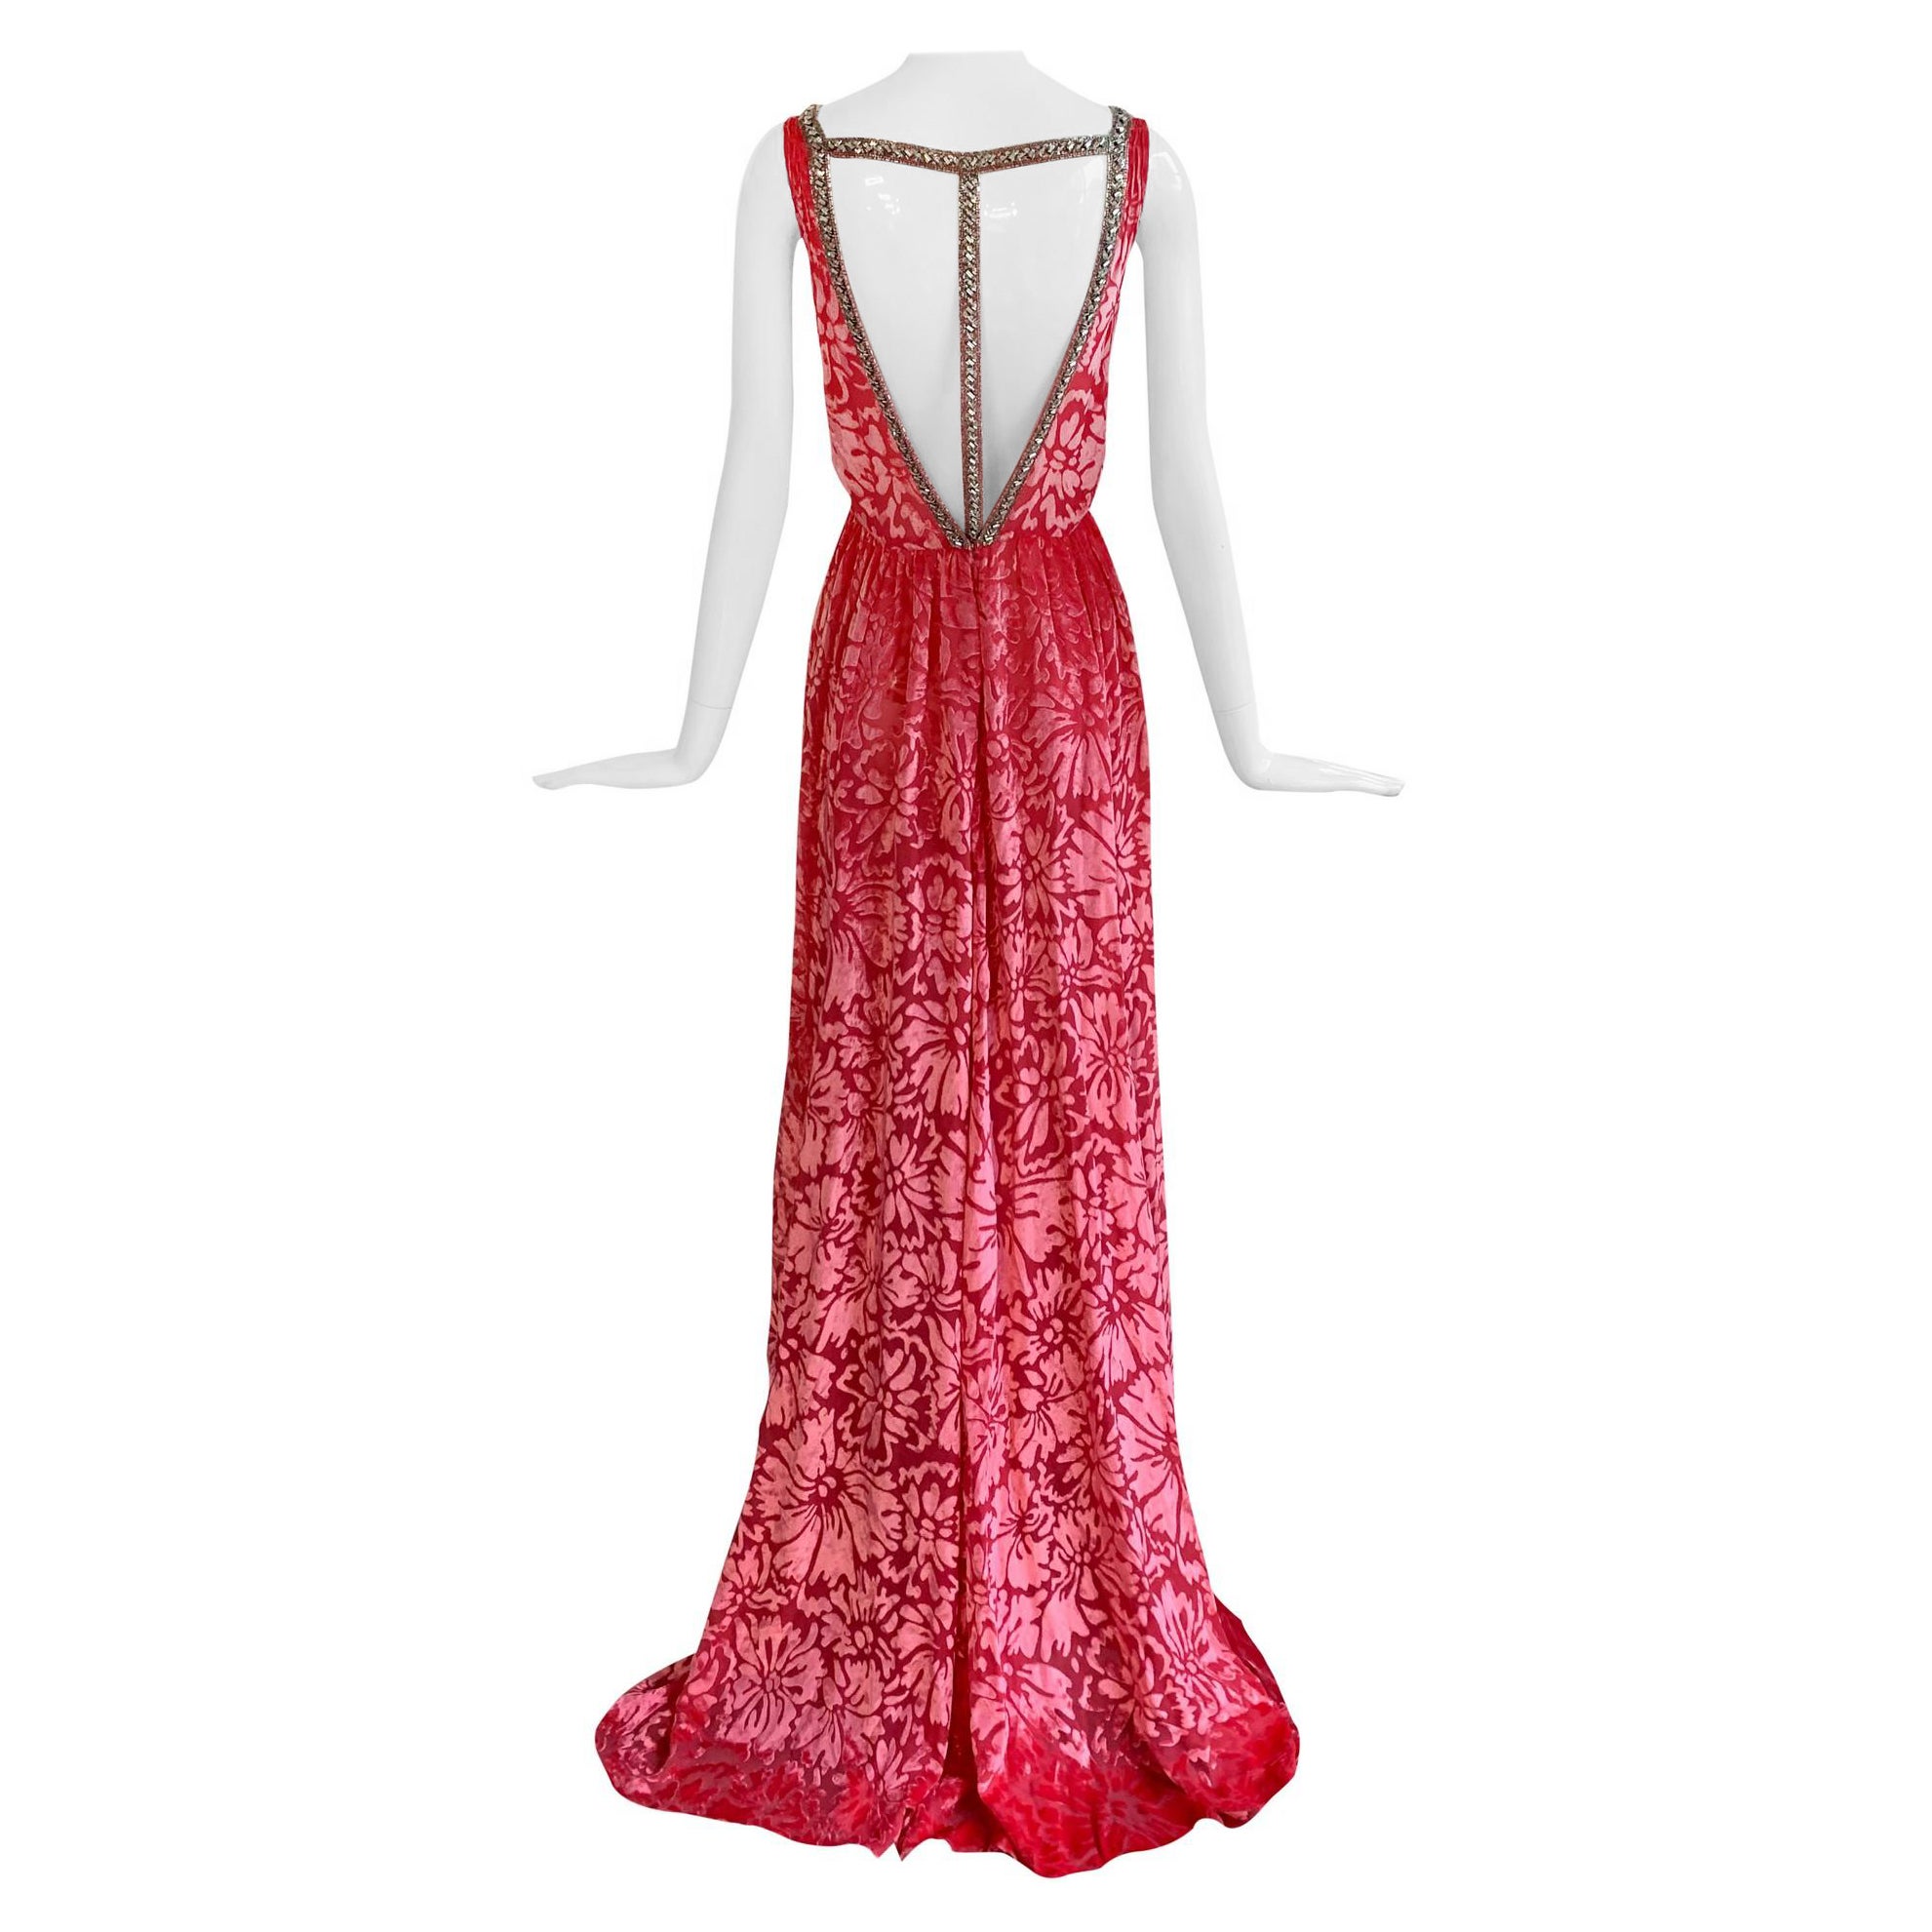 Christian Dior by John Galliano Pink Devore Velvet Evening Gown w/Jeweled Trim For Sale